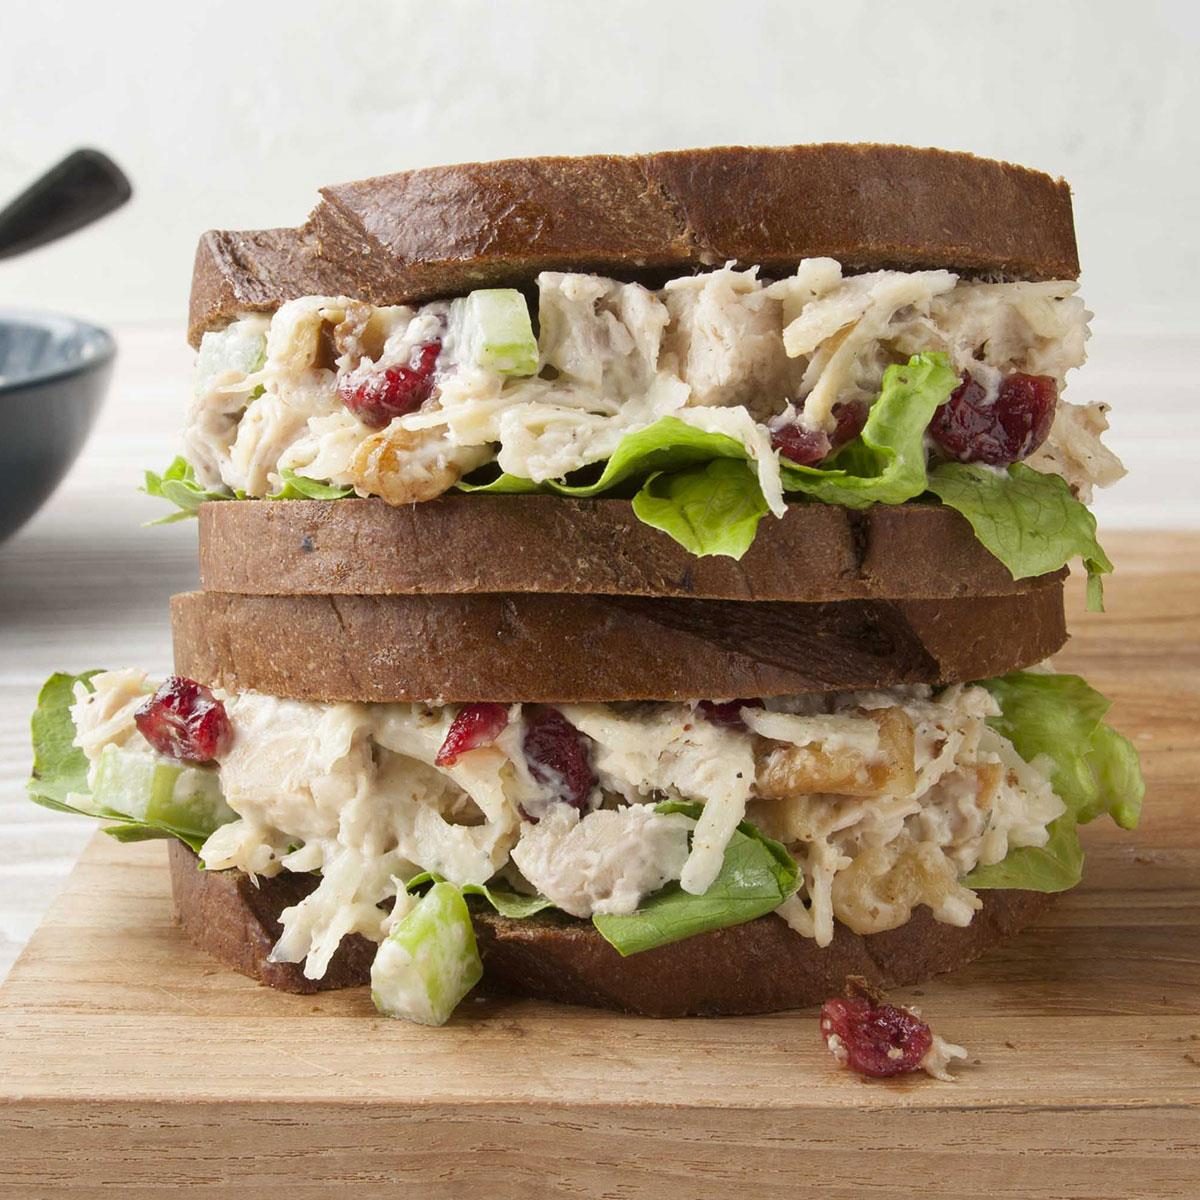 Chilled Grilled Chicken Sub Sandwich Nutrition and Description